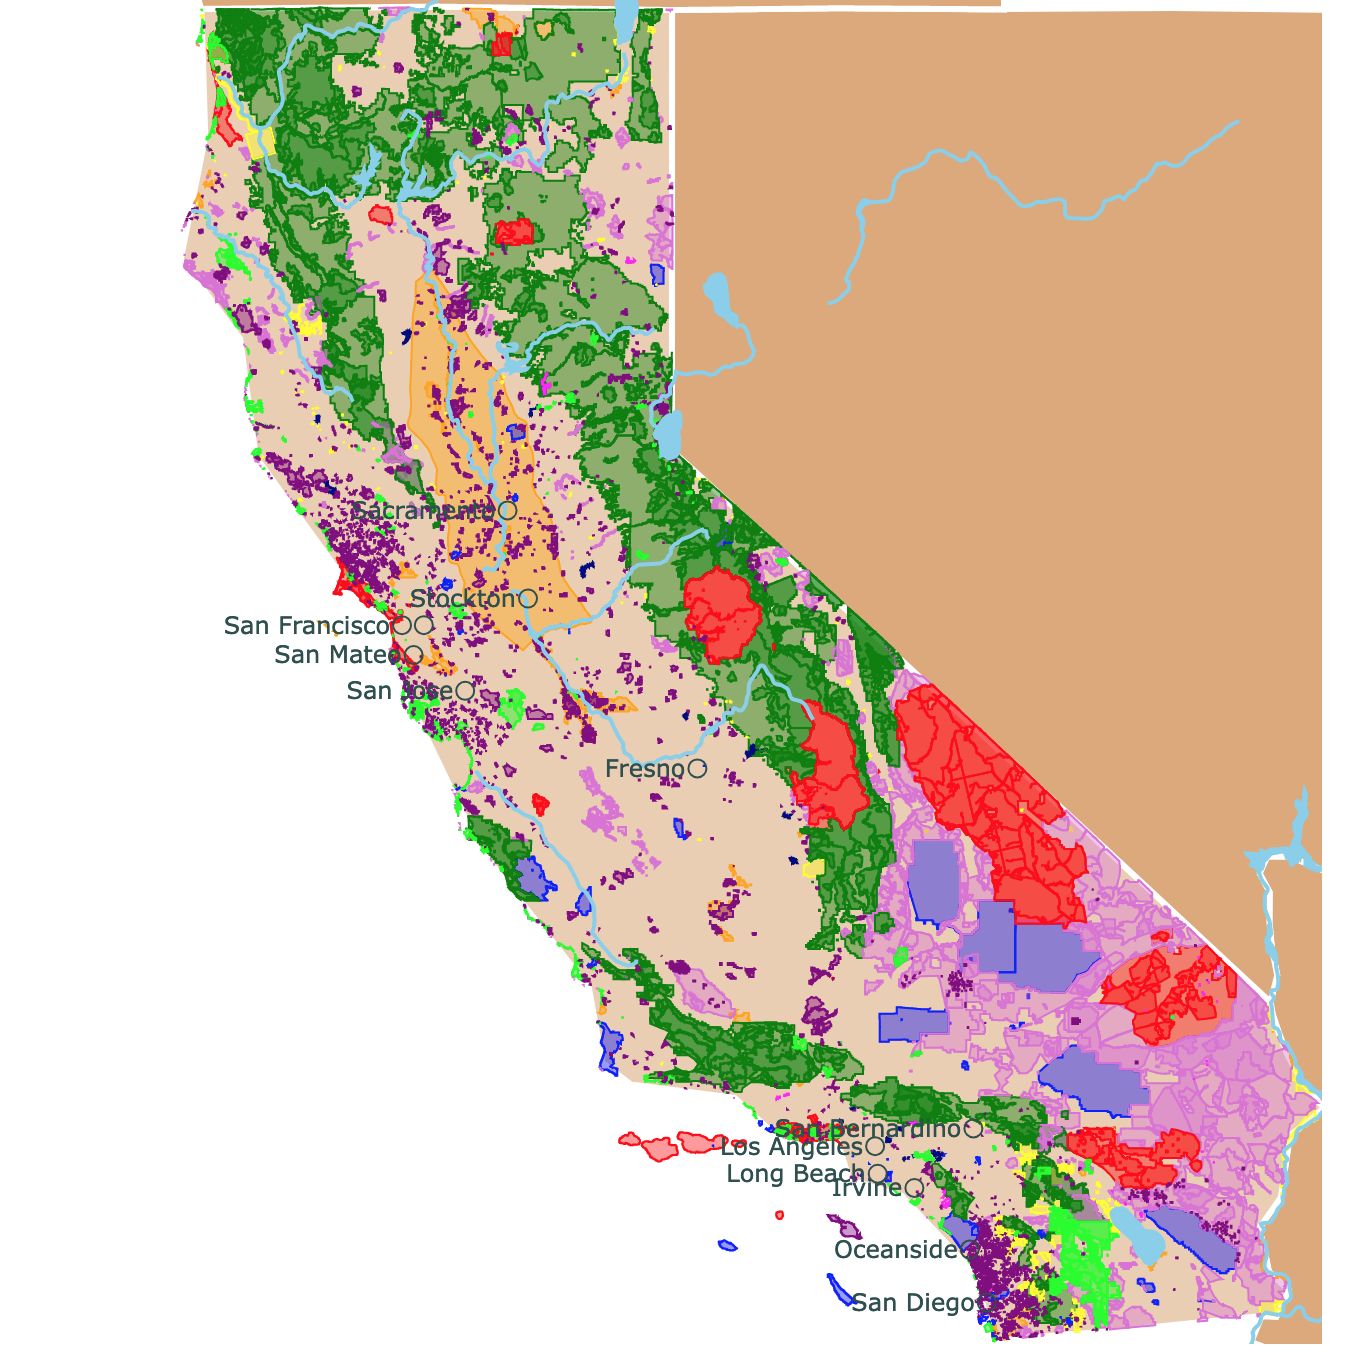 Map of California's National Parks, State Parks, National Forests, and Protected Areas